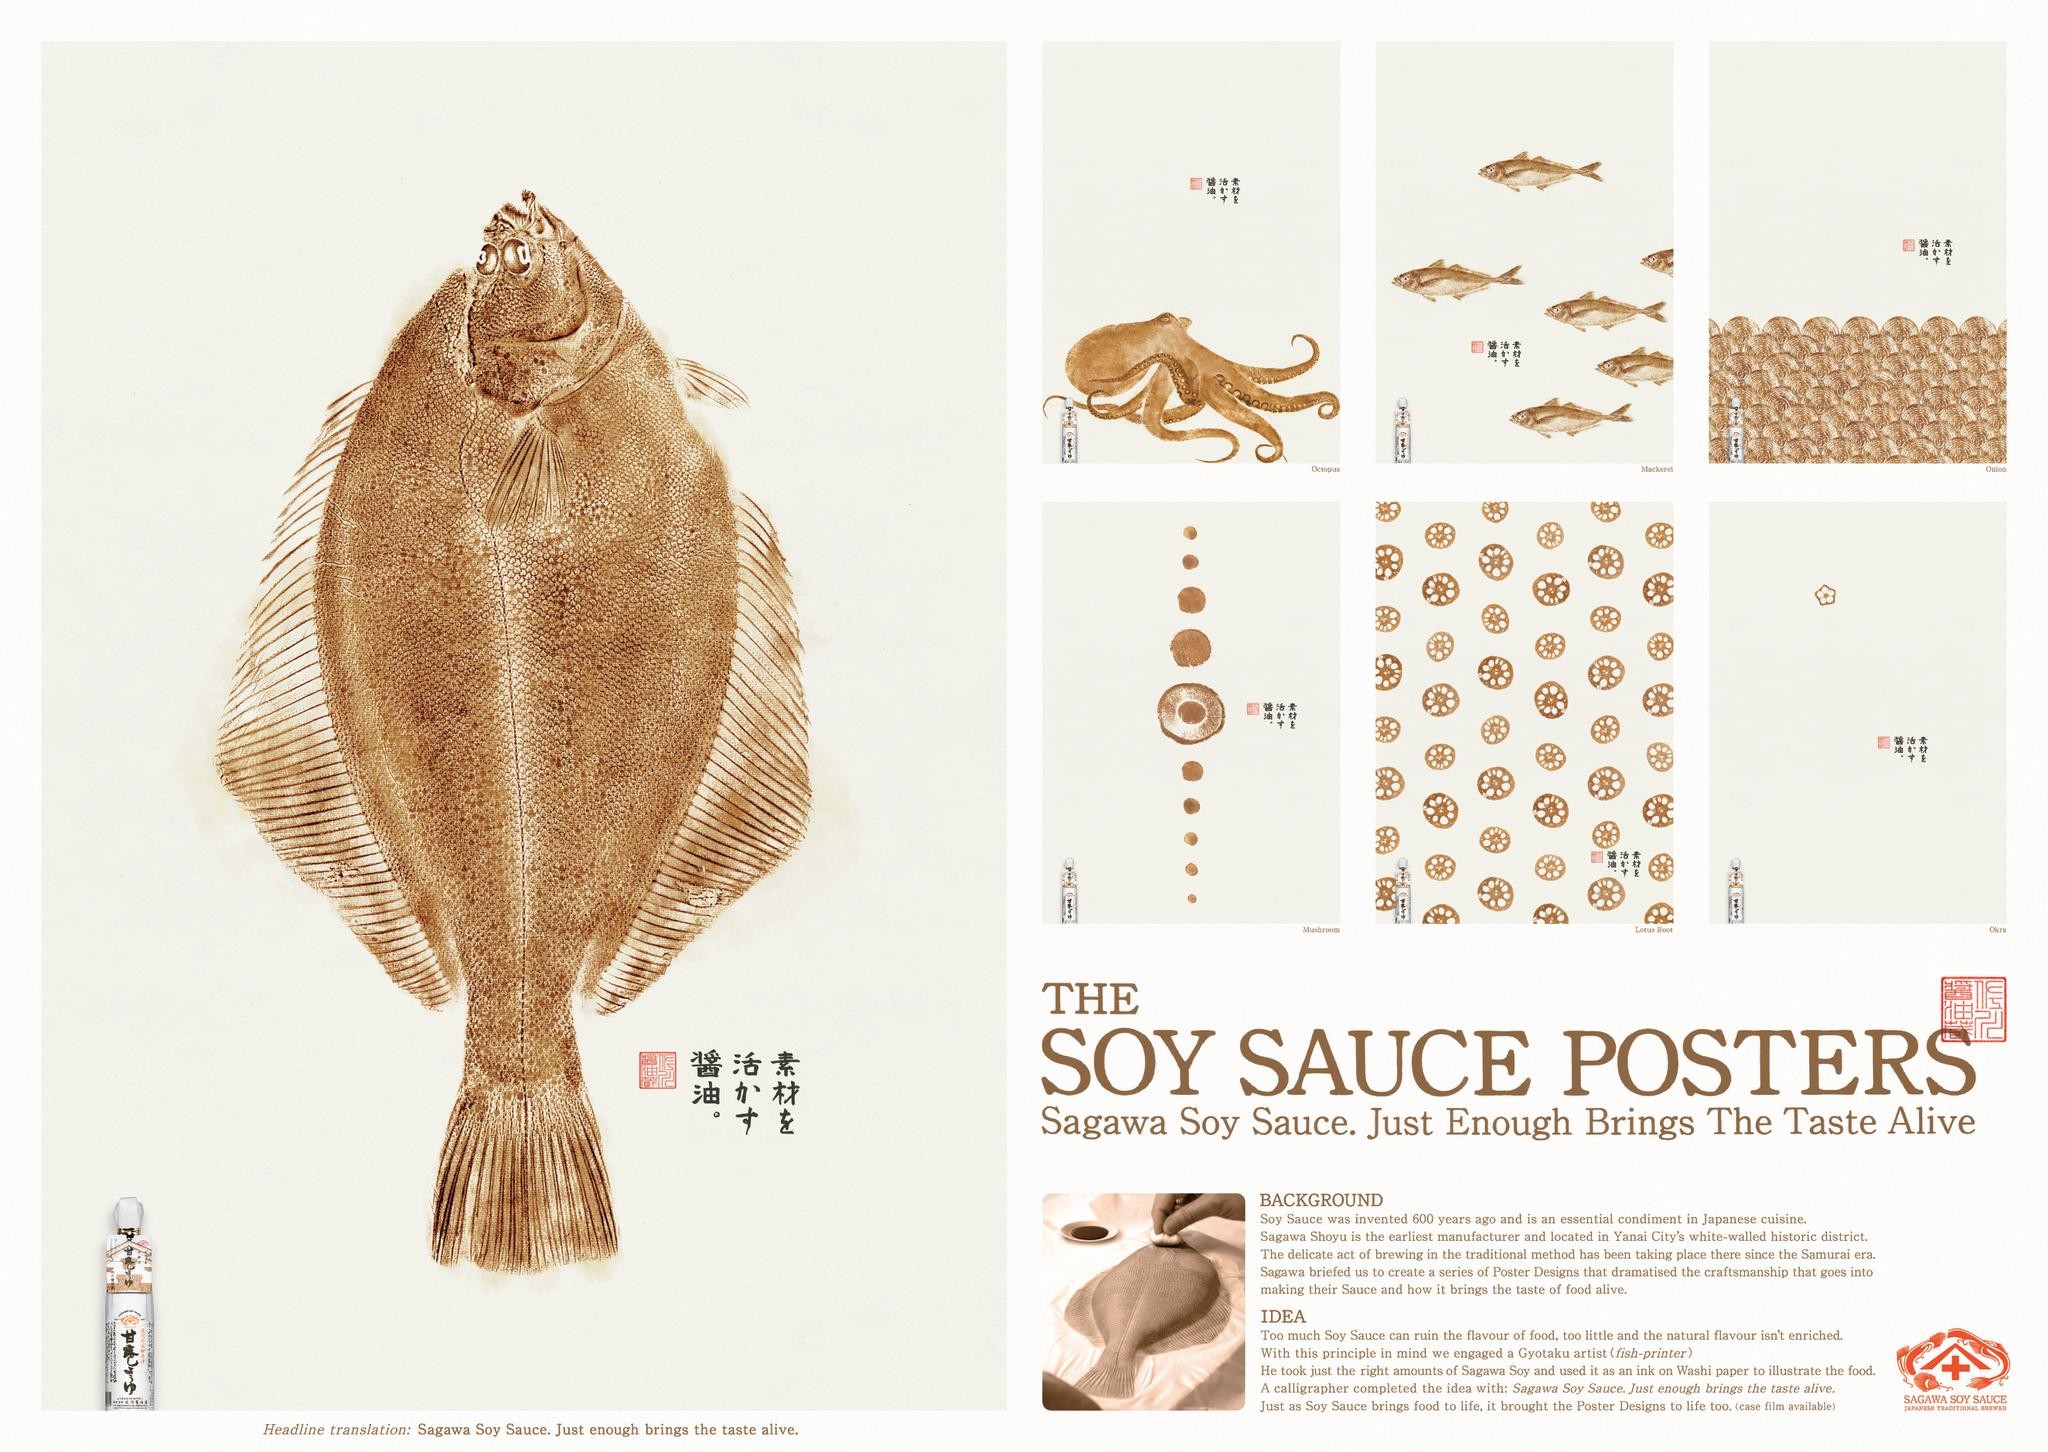 The Soy Sauce Posters